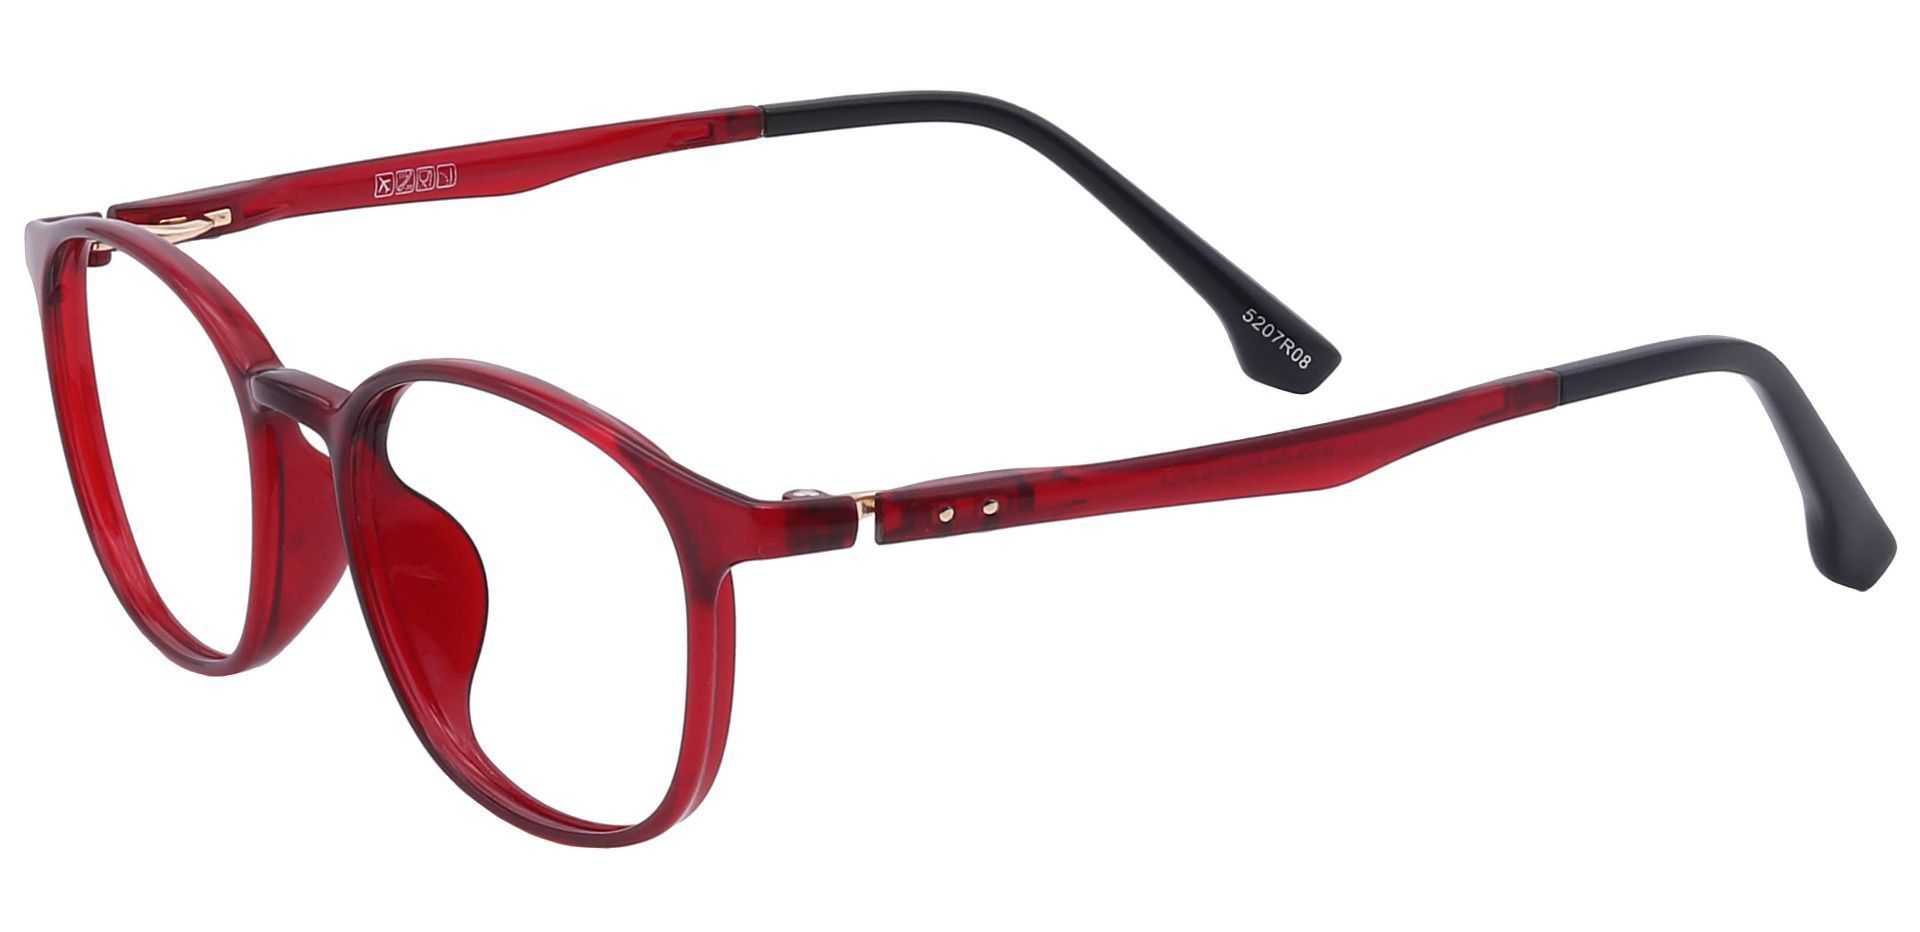 Shannon Oval Lined Bifocal Glasses - Red